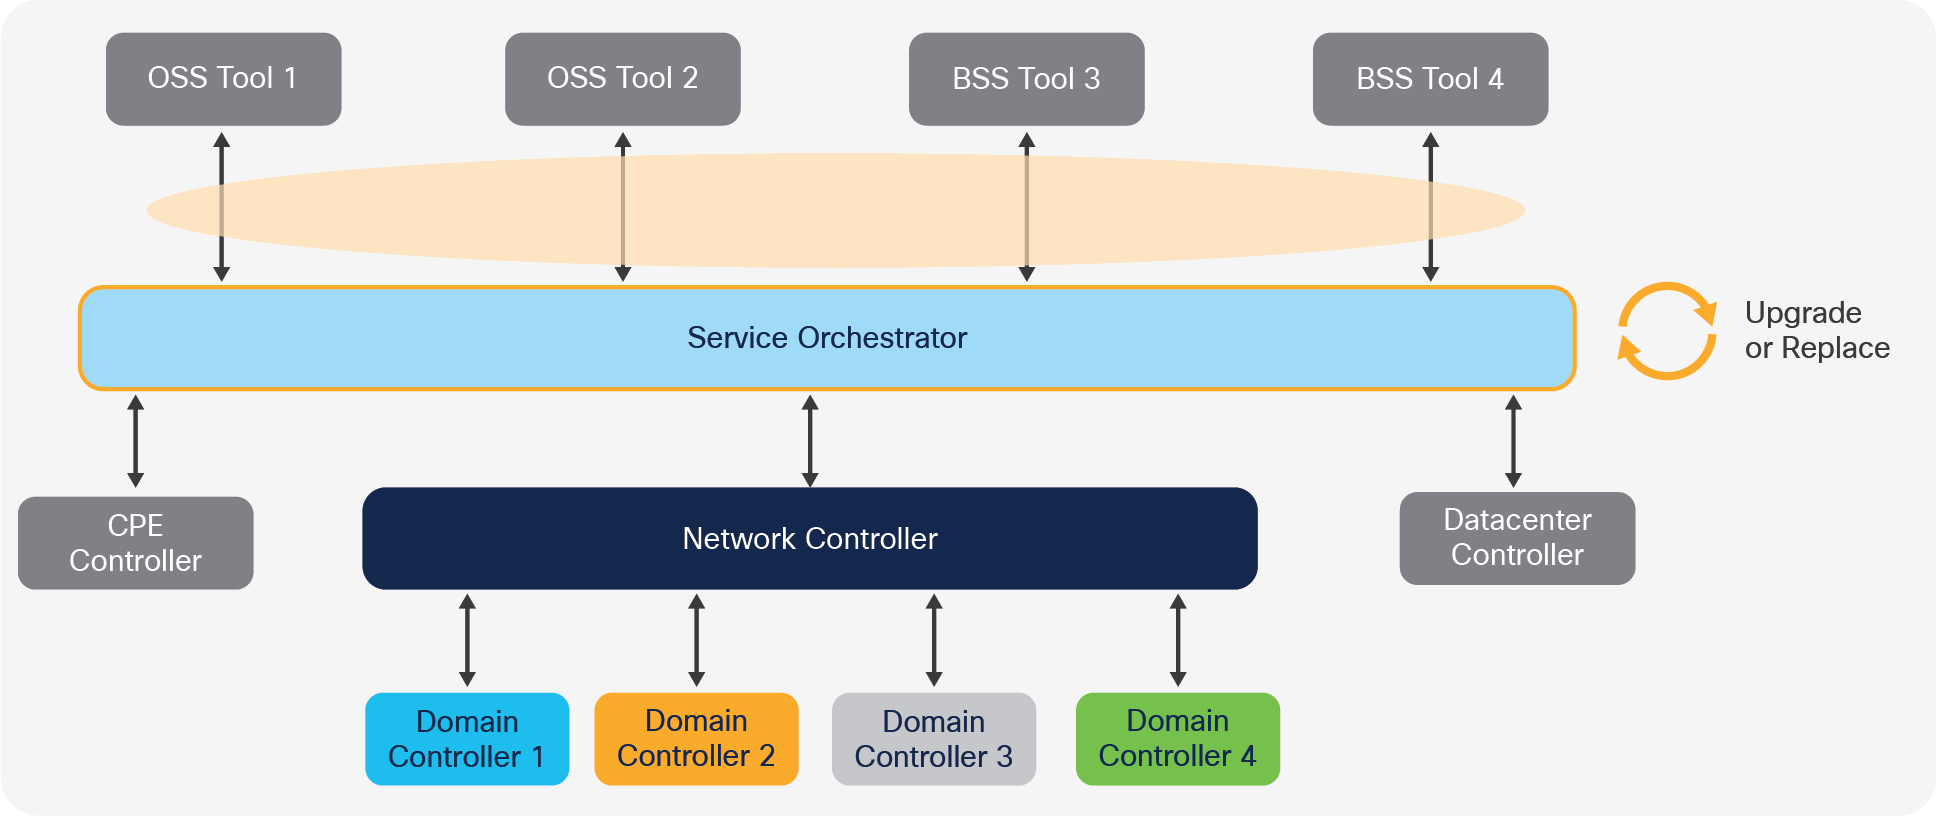 Integration effort needed to upgrade/replace the service orchestrator